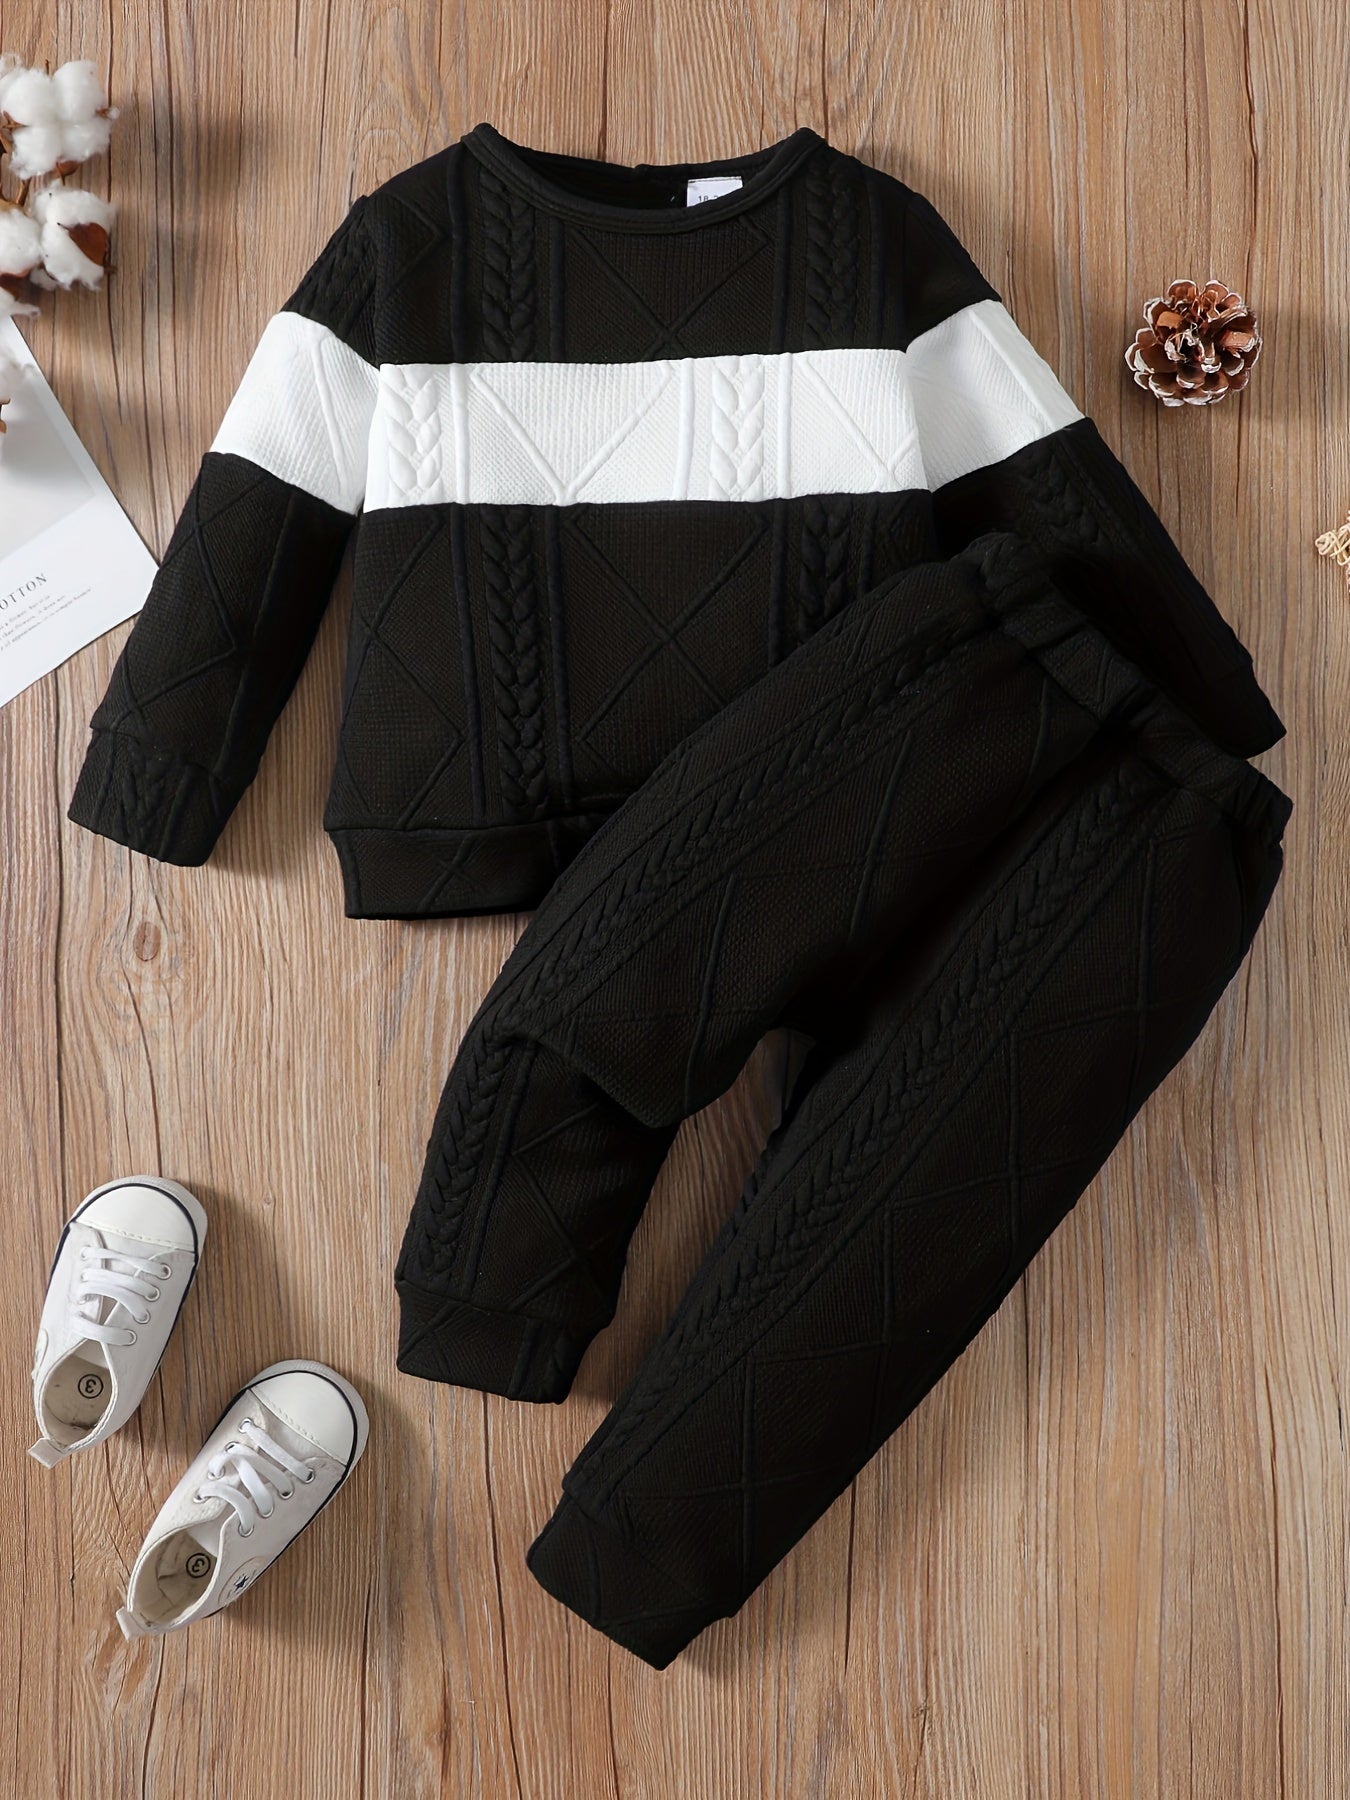 Boys Casual Knitted Color Block Pullover Top & Pants 2pcs Set Kids Clothes Autumn And Winter